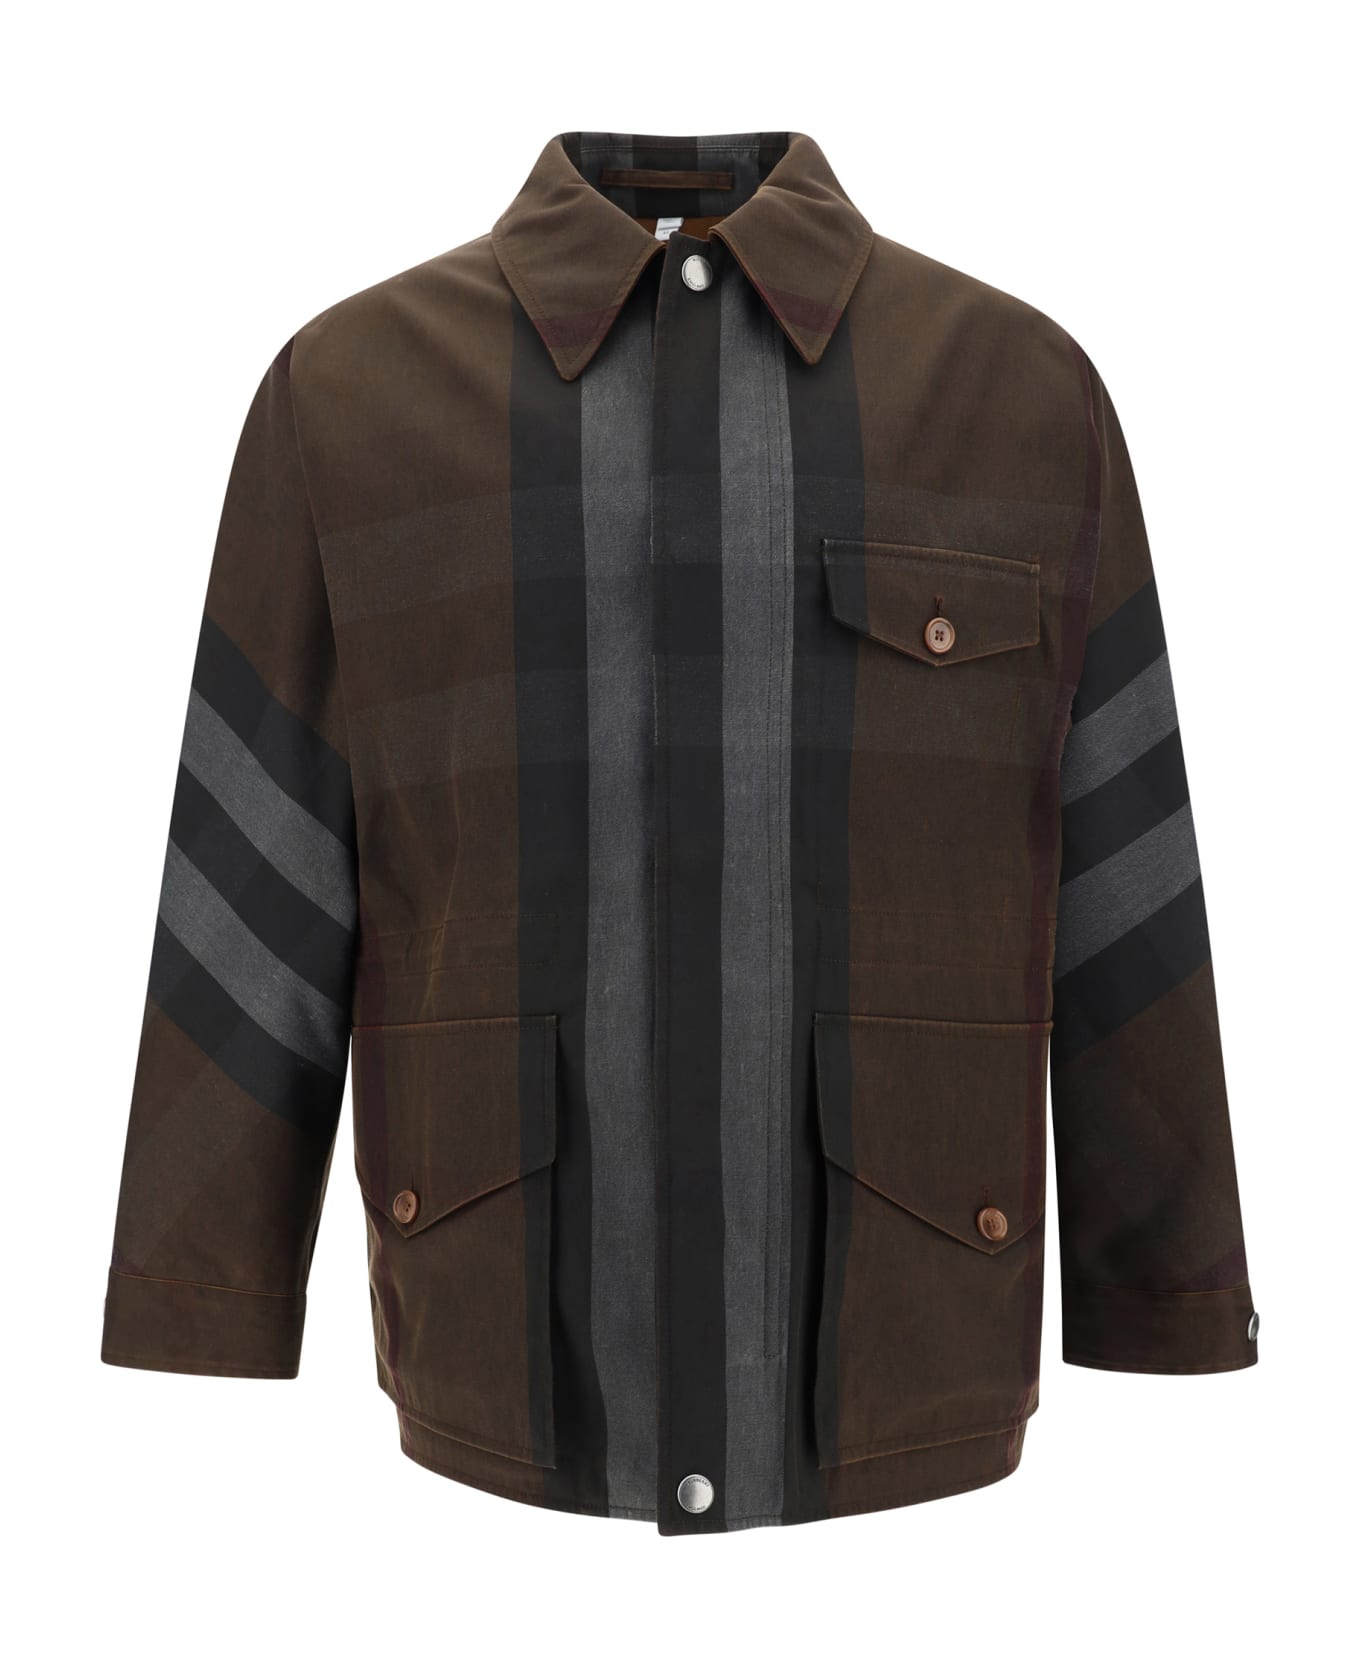 Burberry Field Check Jacket - Brown